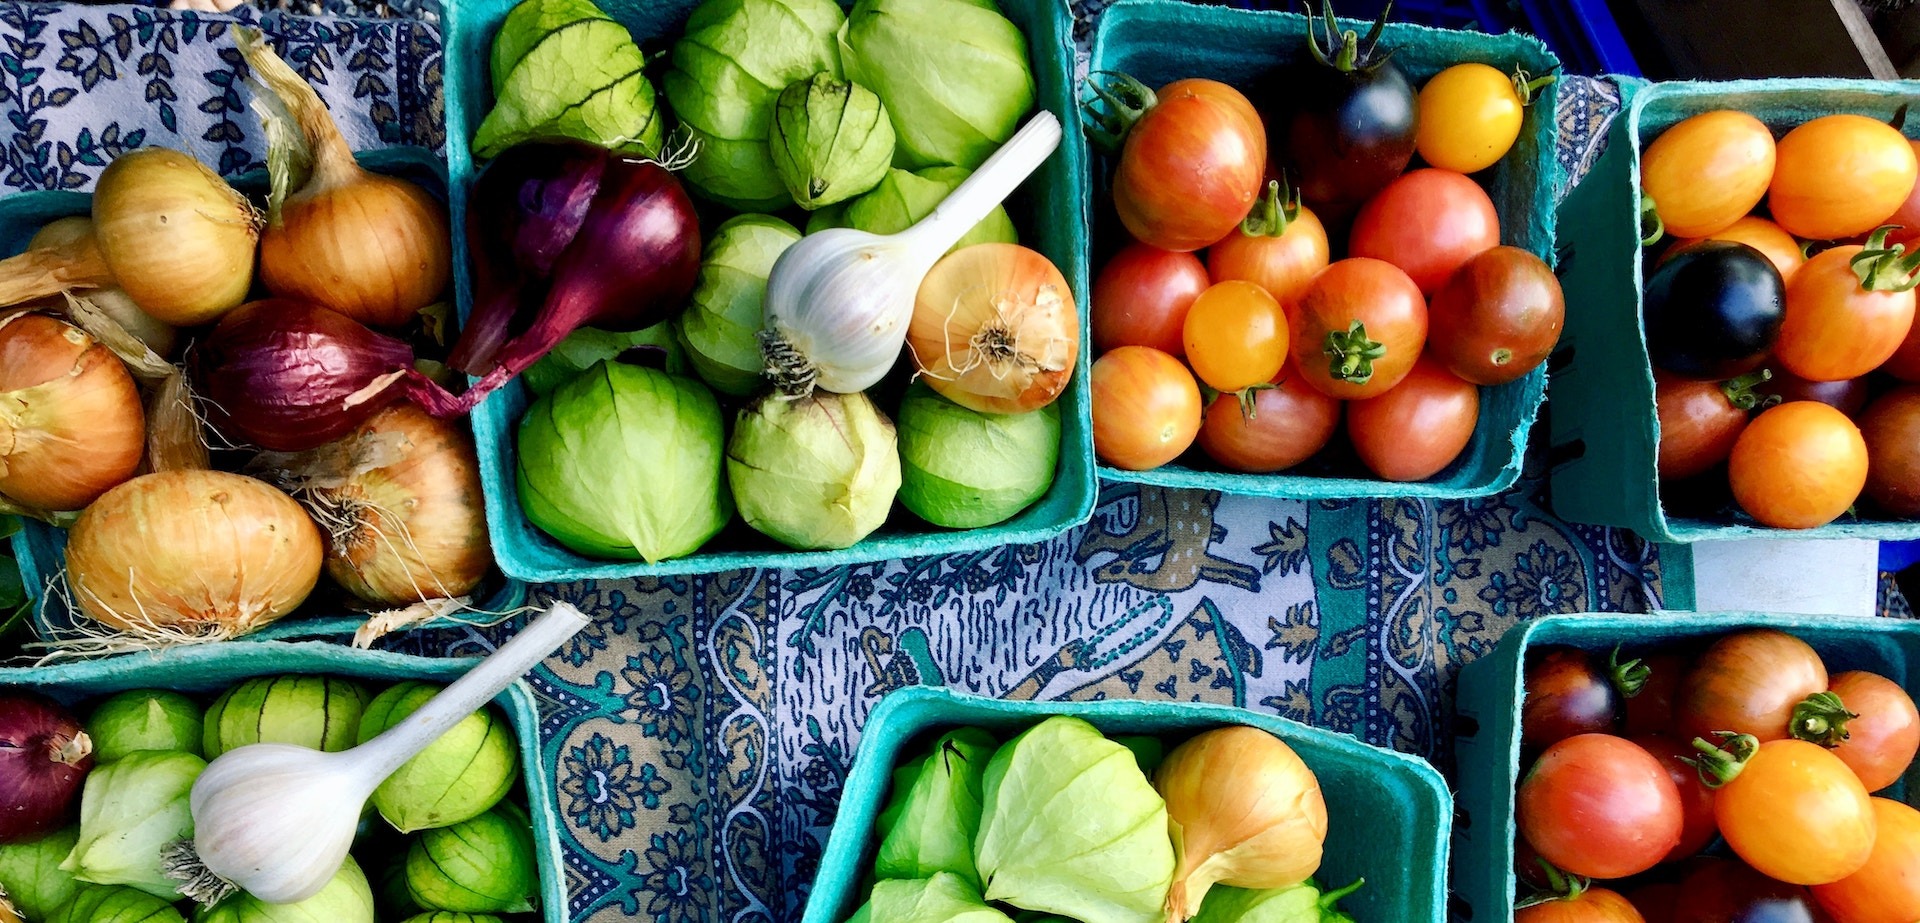 garlic tomatoes and tomatillos on farmers market table